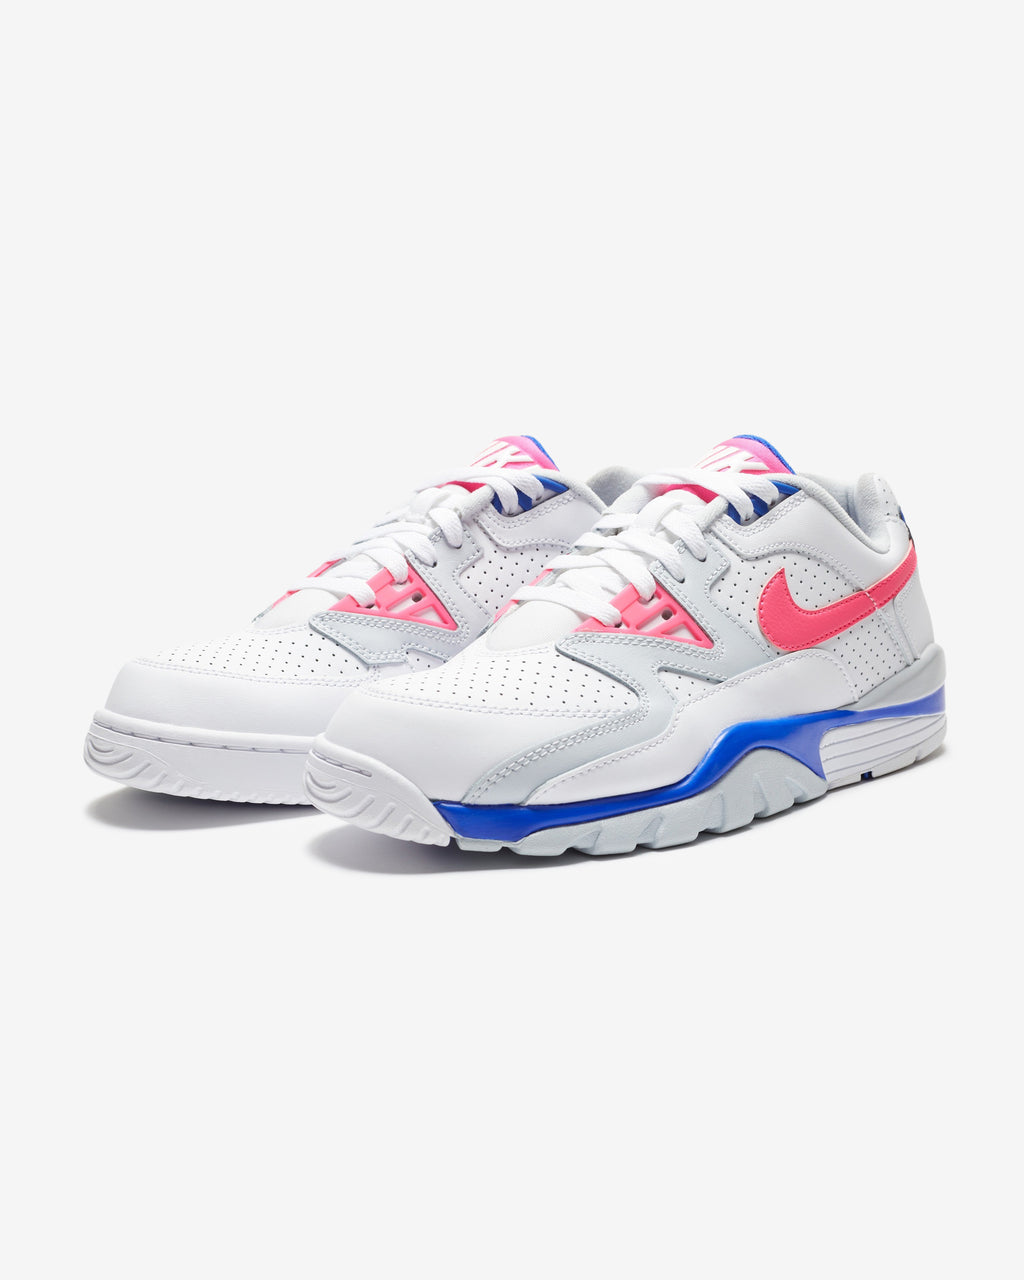 AIR CROSS TRAINER 3 LOW - WHITE/ HYPERPINK/ RACERBLUE